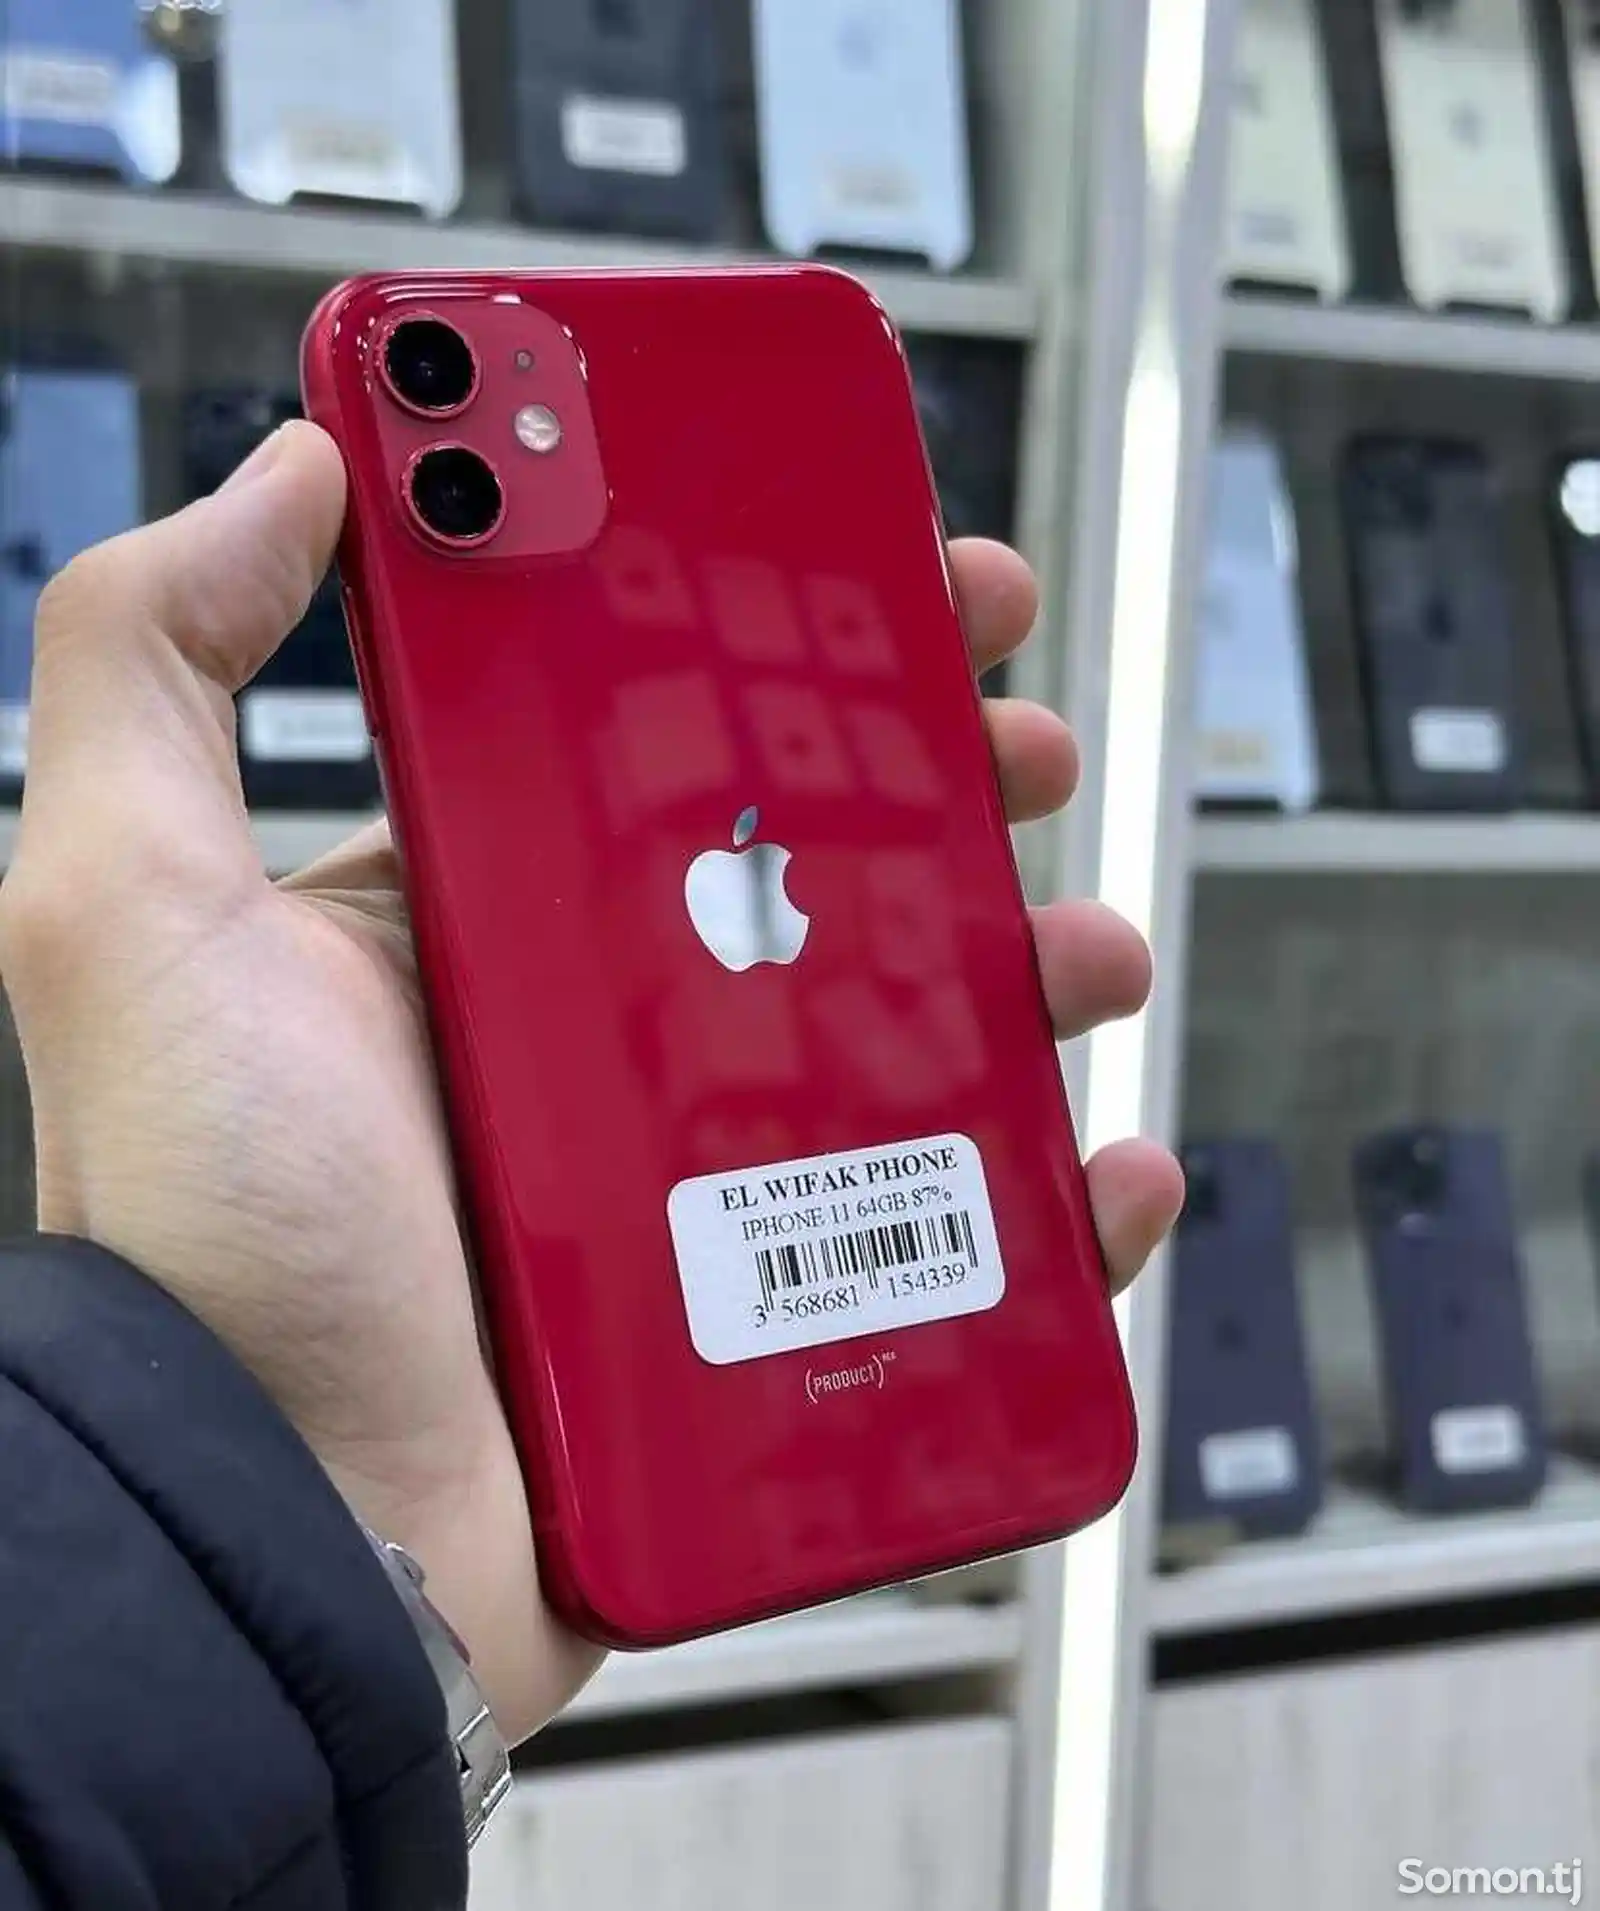 Apple iPhone 11, 128 gb, Product Red-5